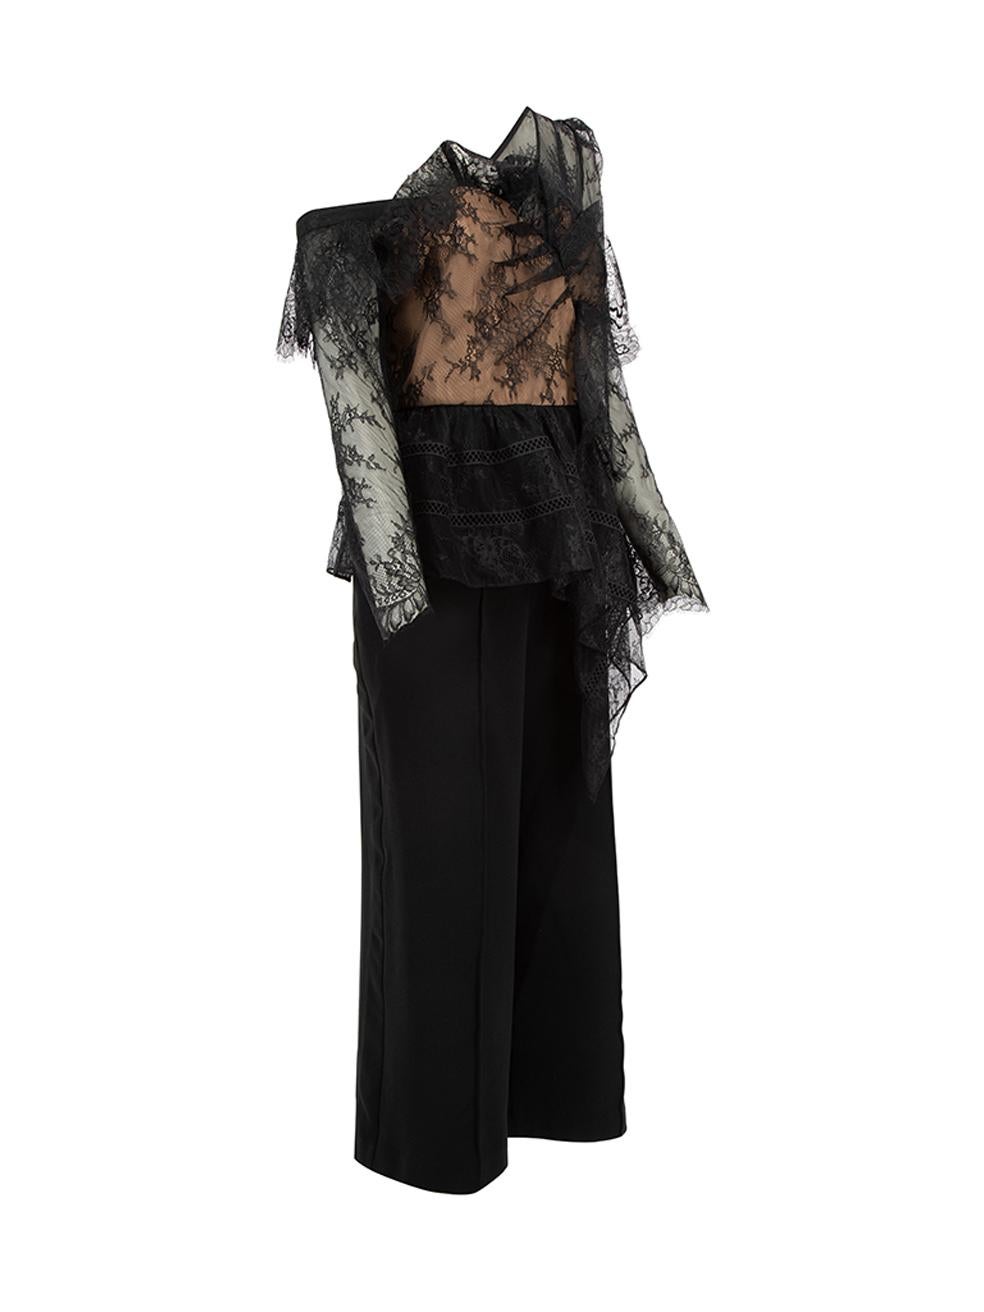 CONDITION is Very good. Hardly any visible wear to dress is evident on this used Self-Portrait designer resale item.   Details  Black Synthetic Jumpsuit Floral lace detail One shoulder and off shoulder sleeves Buttoned cuffs Boned Cropped wide leg